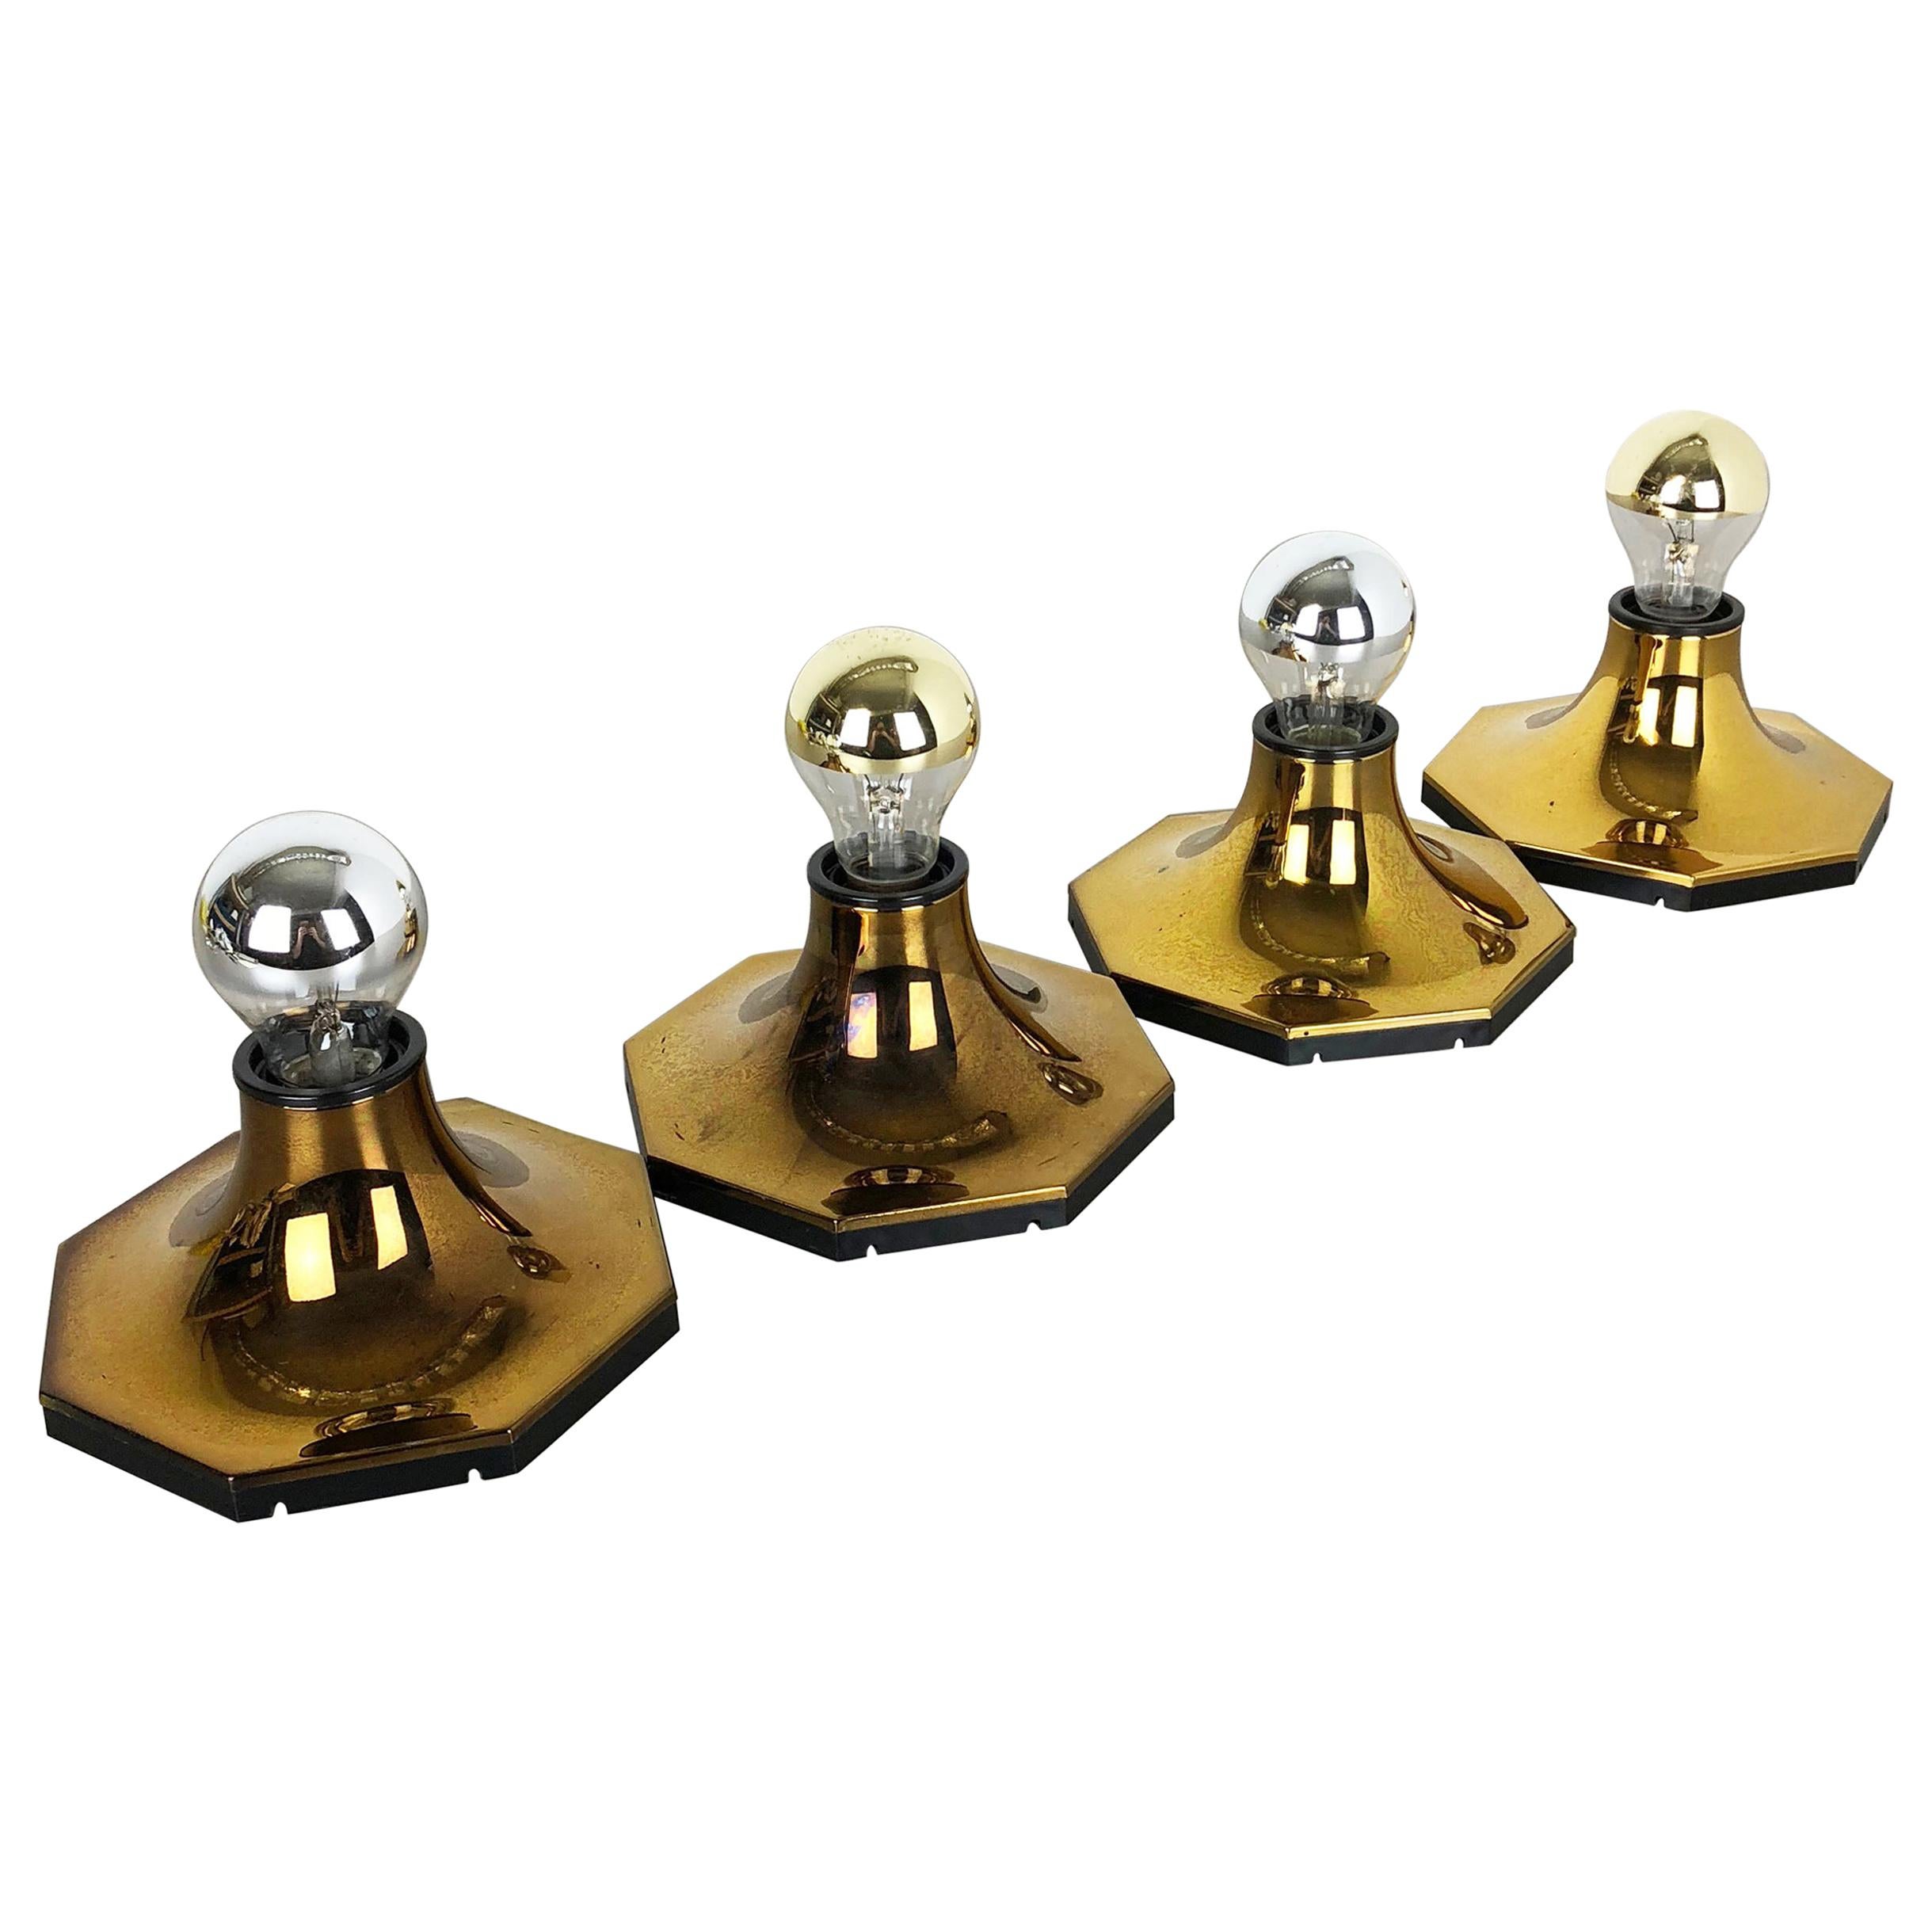 Set of Four Golden Cubic Wall Lights by Motoko Ishii for Staff Lights, 1970